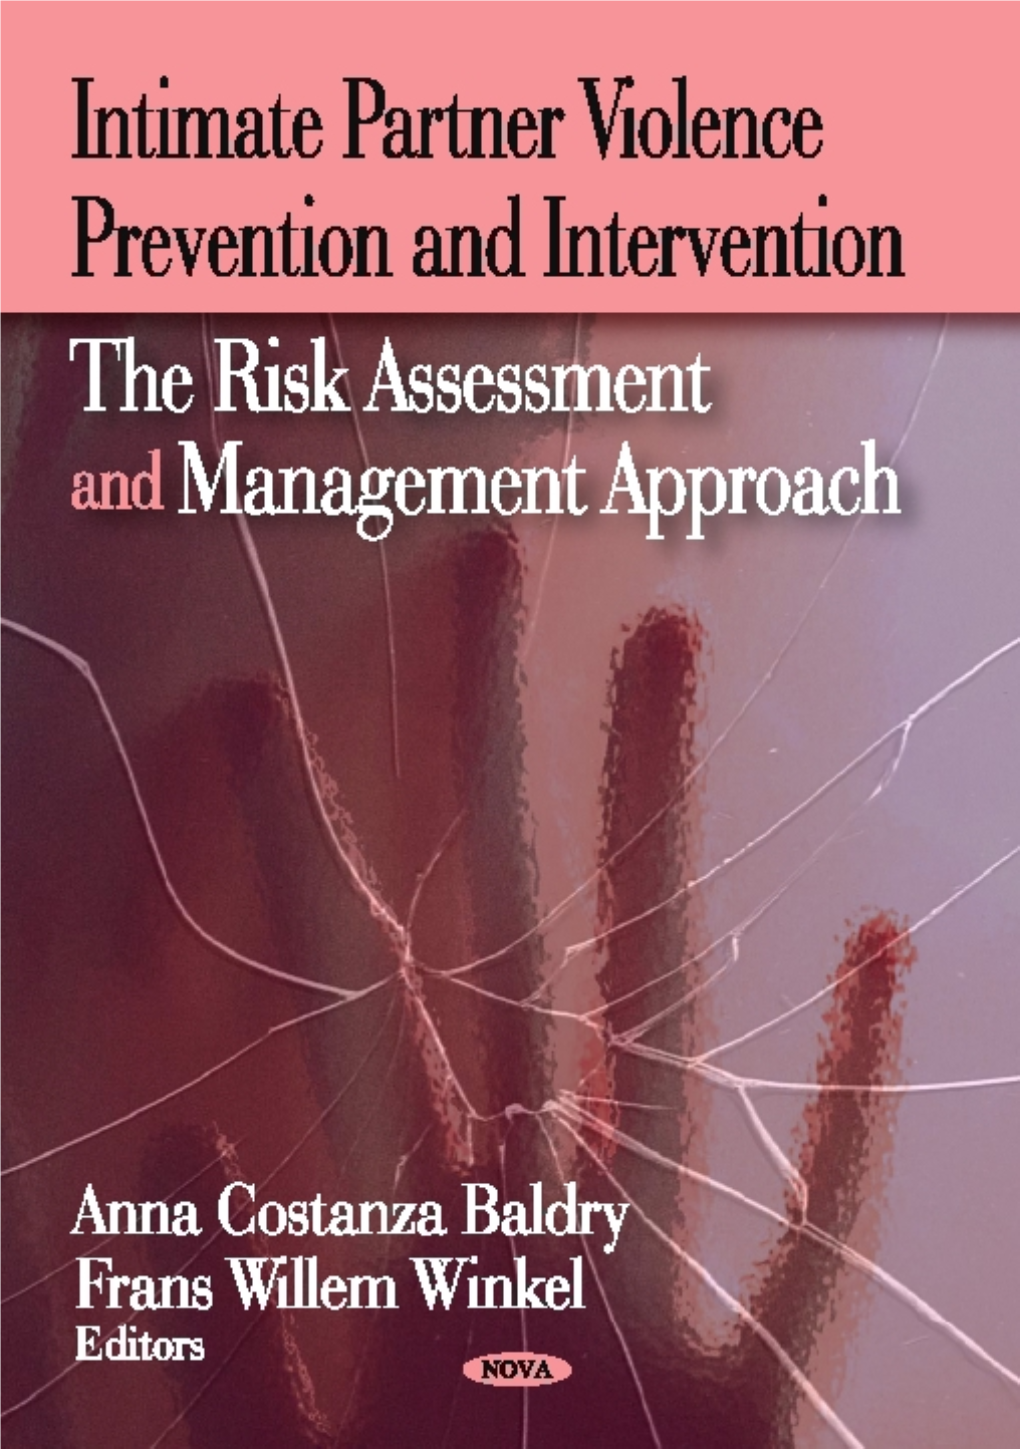 Intimate Partner Violence Prevention and Intervention: the Risk Assessment and Management Approach